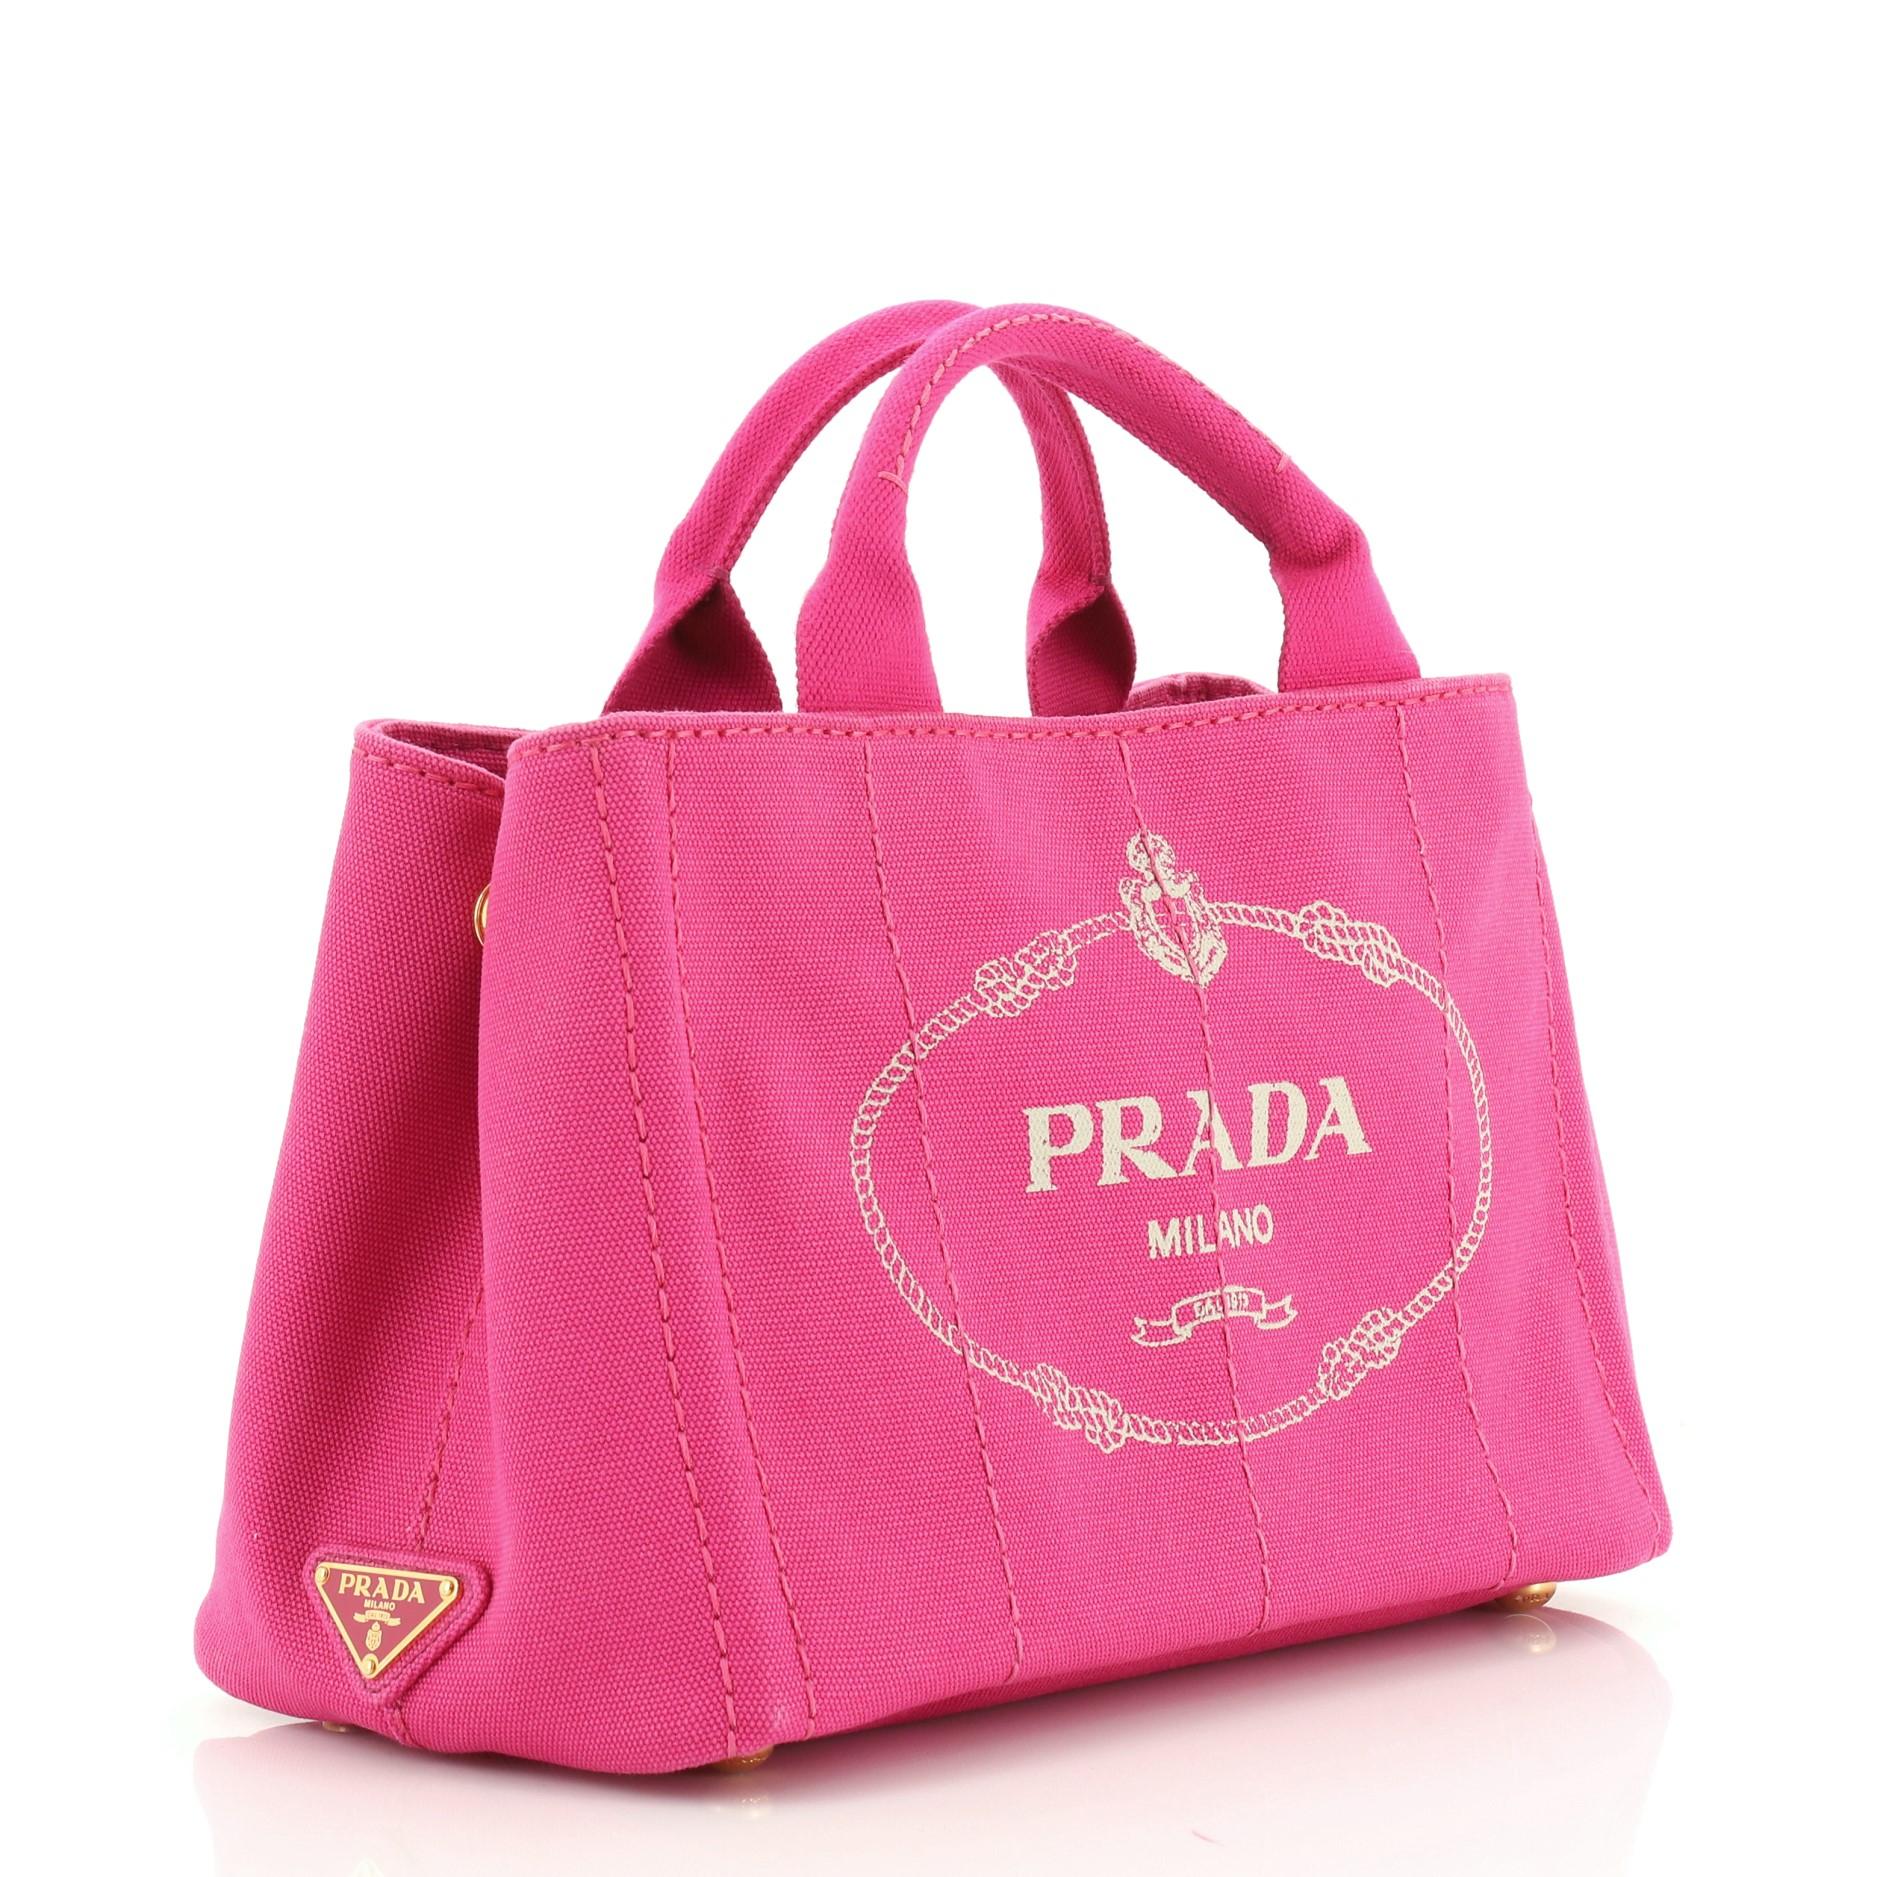 This Prada Canapa Convertible Tote Canvas Mini, crafted in pink canvas, features dual top handles, side snap buttons, protective base studs, and gold-tone hardware. It opens to a pink canvas interior with side zip and slip pockets. 

Estimated